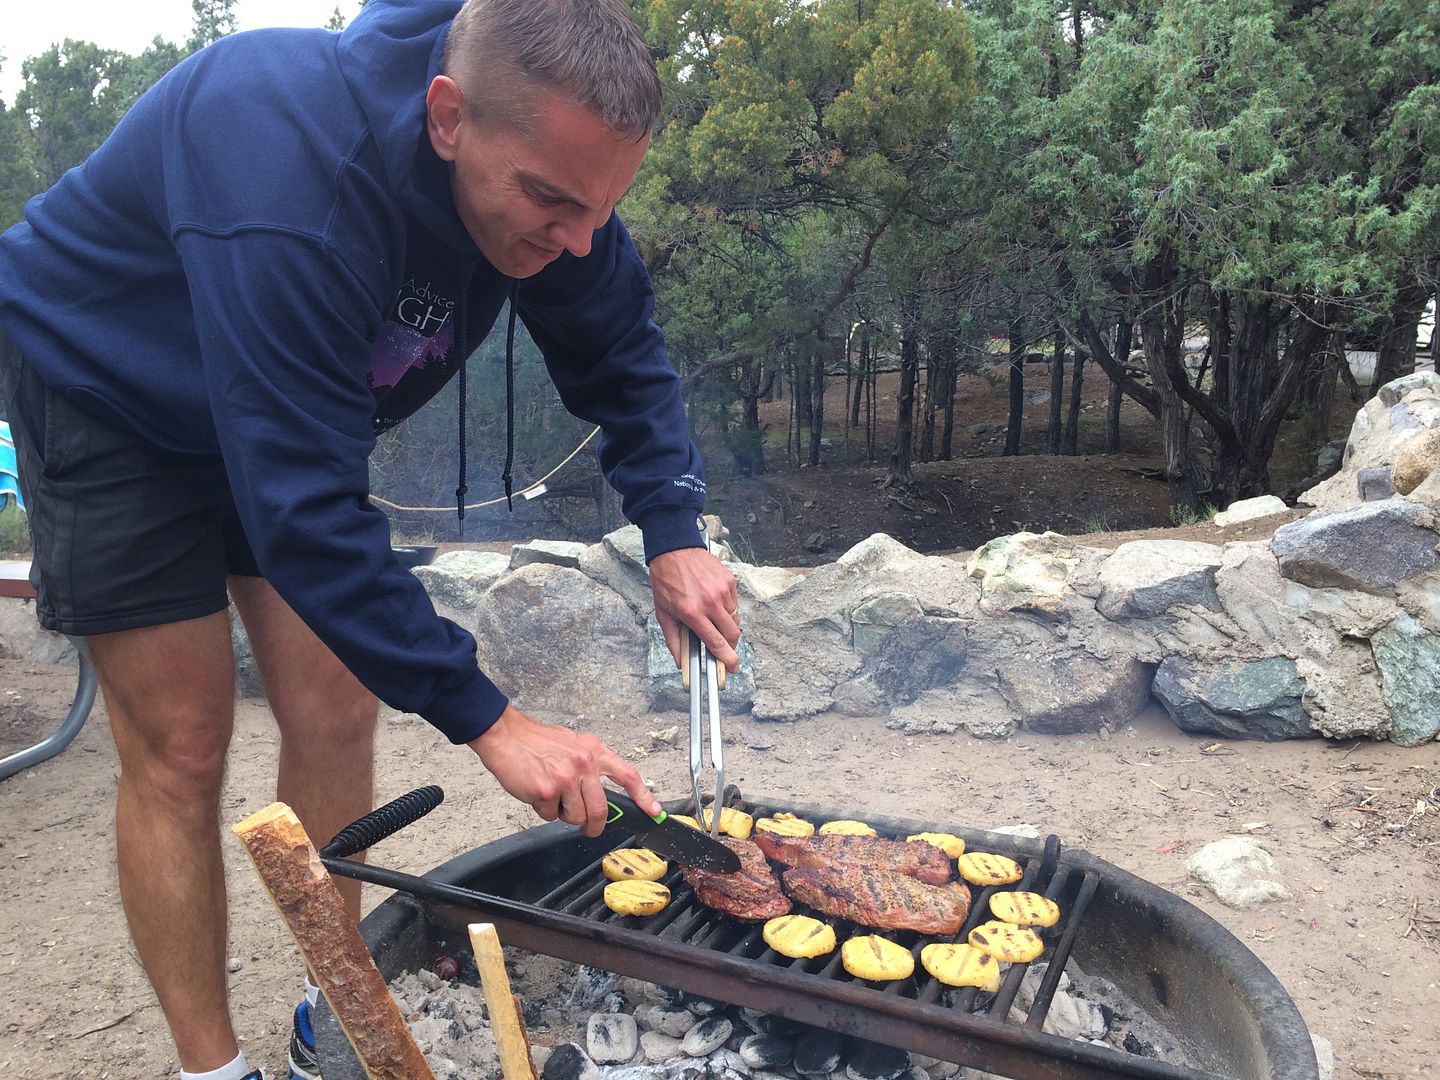 Steak and polenta cooked on the grill | Cool Mom Picks